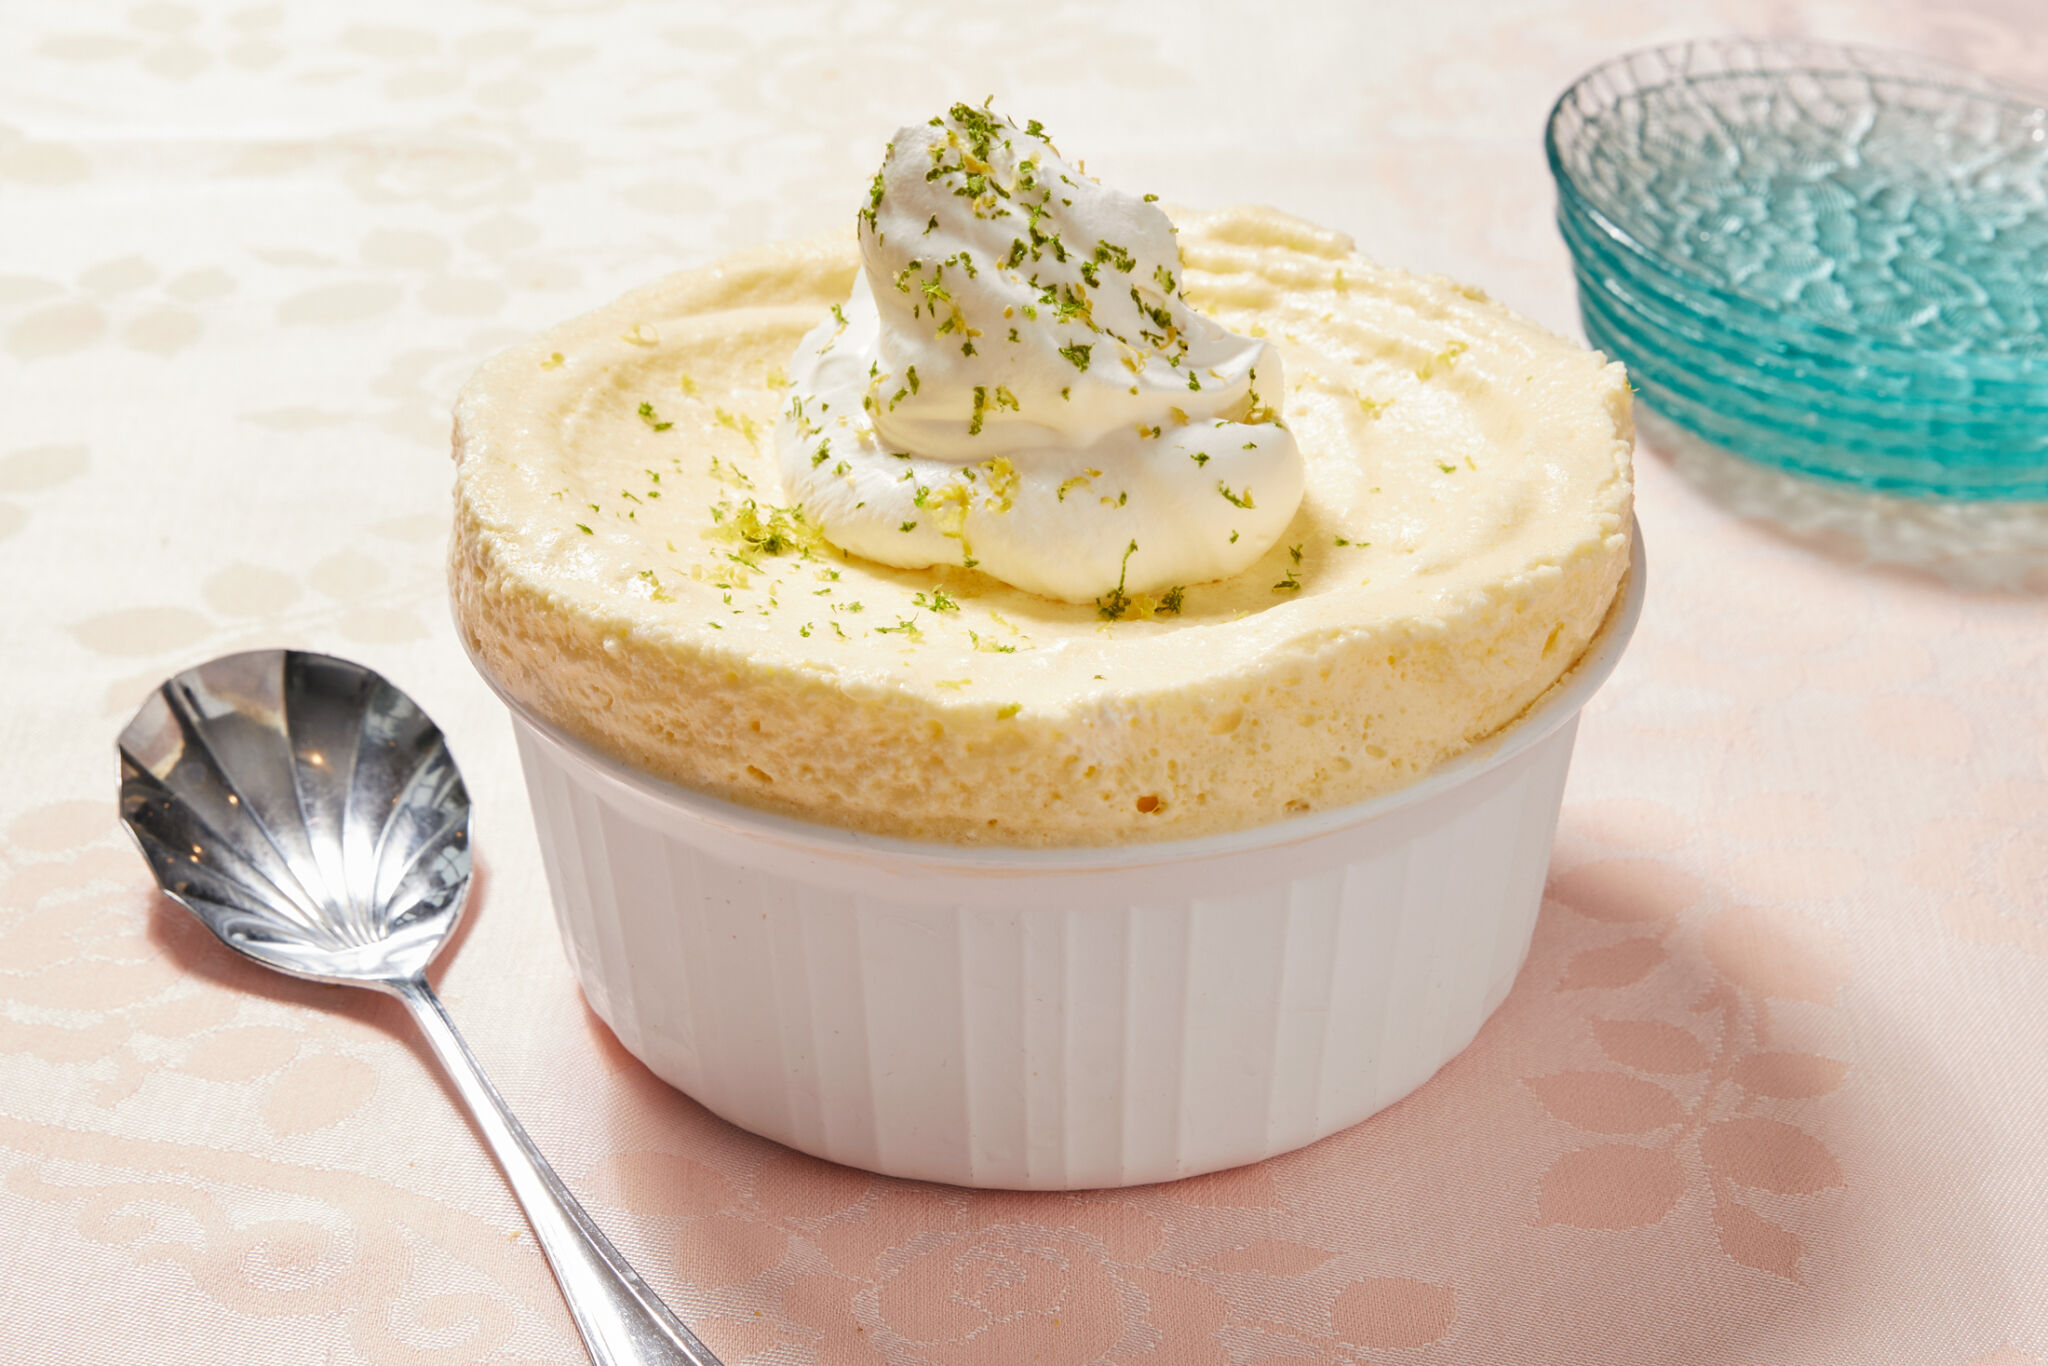 The silky smooth soufflé is perfectly set in a white ramekin, topped with a dollop of fluffy whipped cream and sprinkled with refreshing lemon and lime zest to boost the flavor. A silver serving spoon is in the bottom let corner and a stack of light-blue glass dessert plates are in the top right corner.